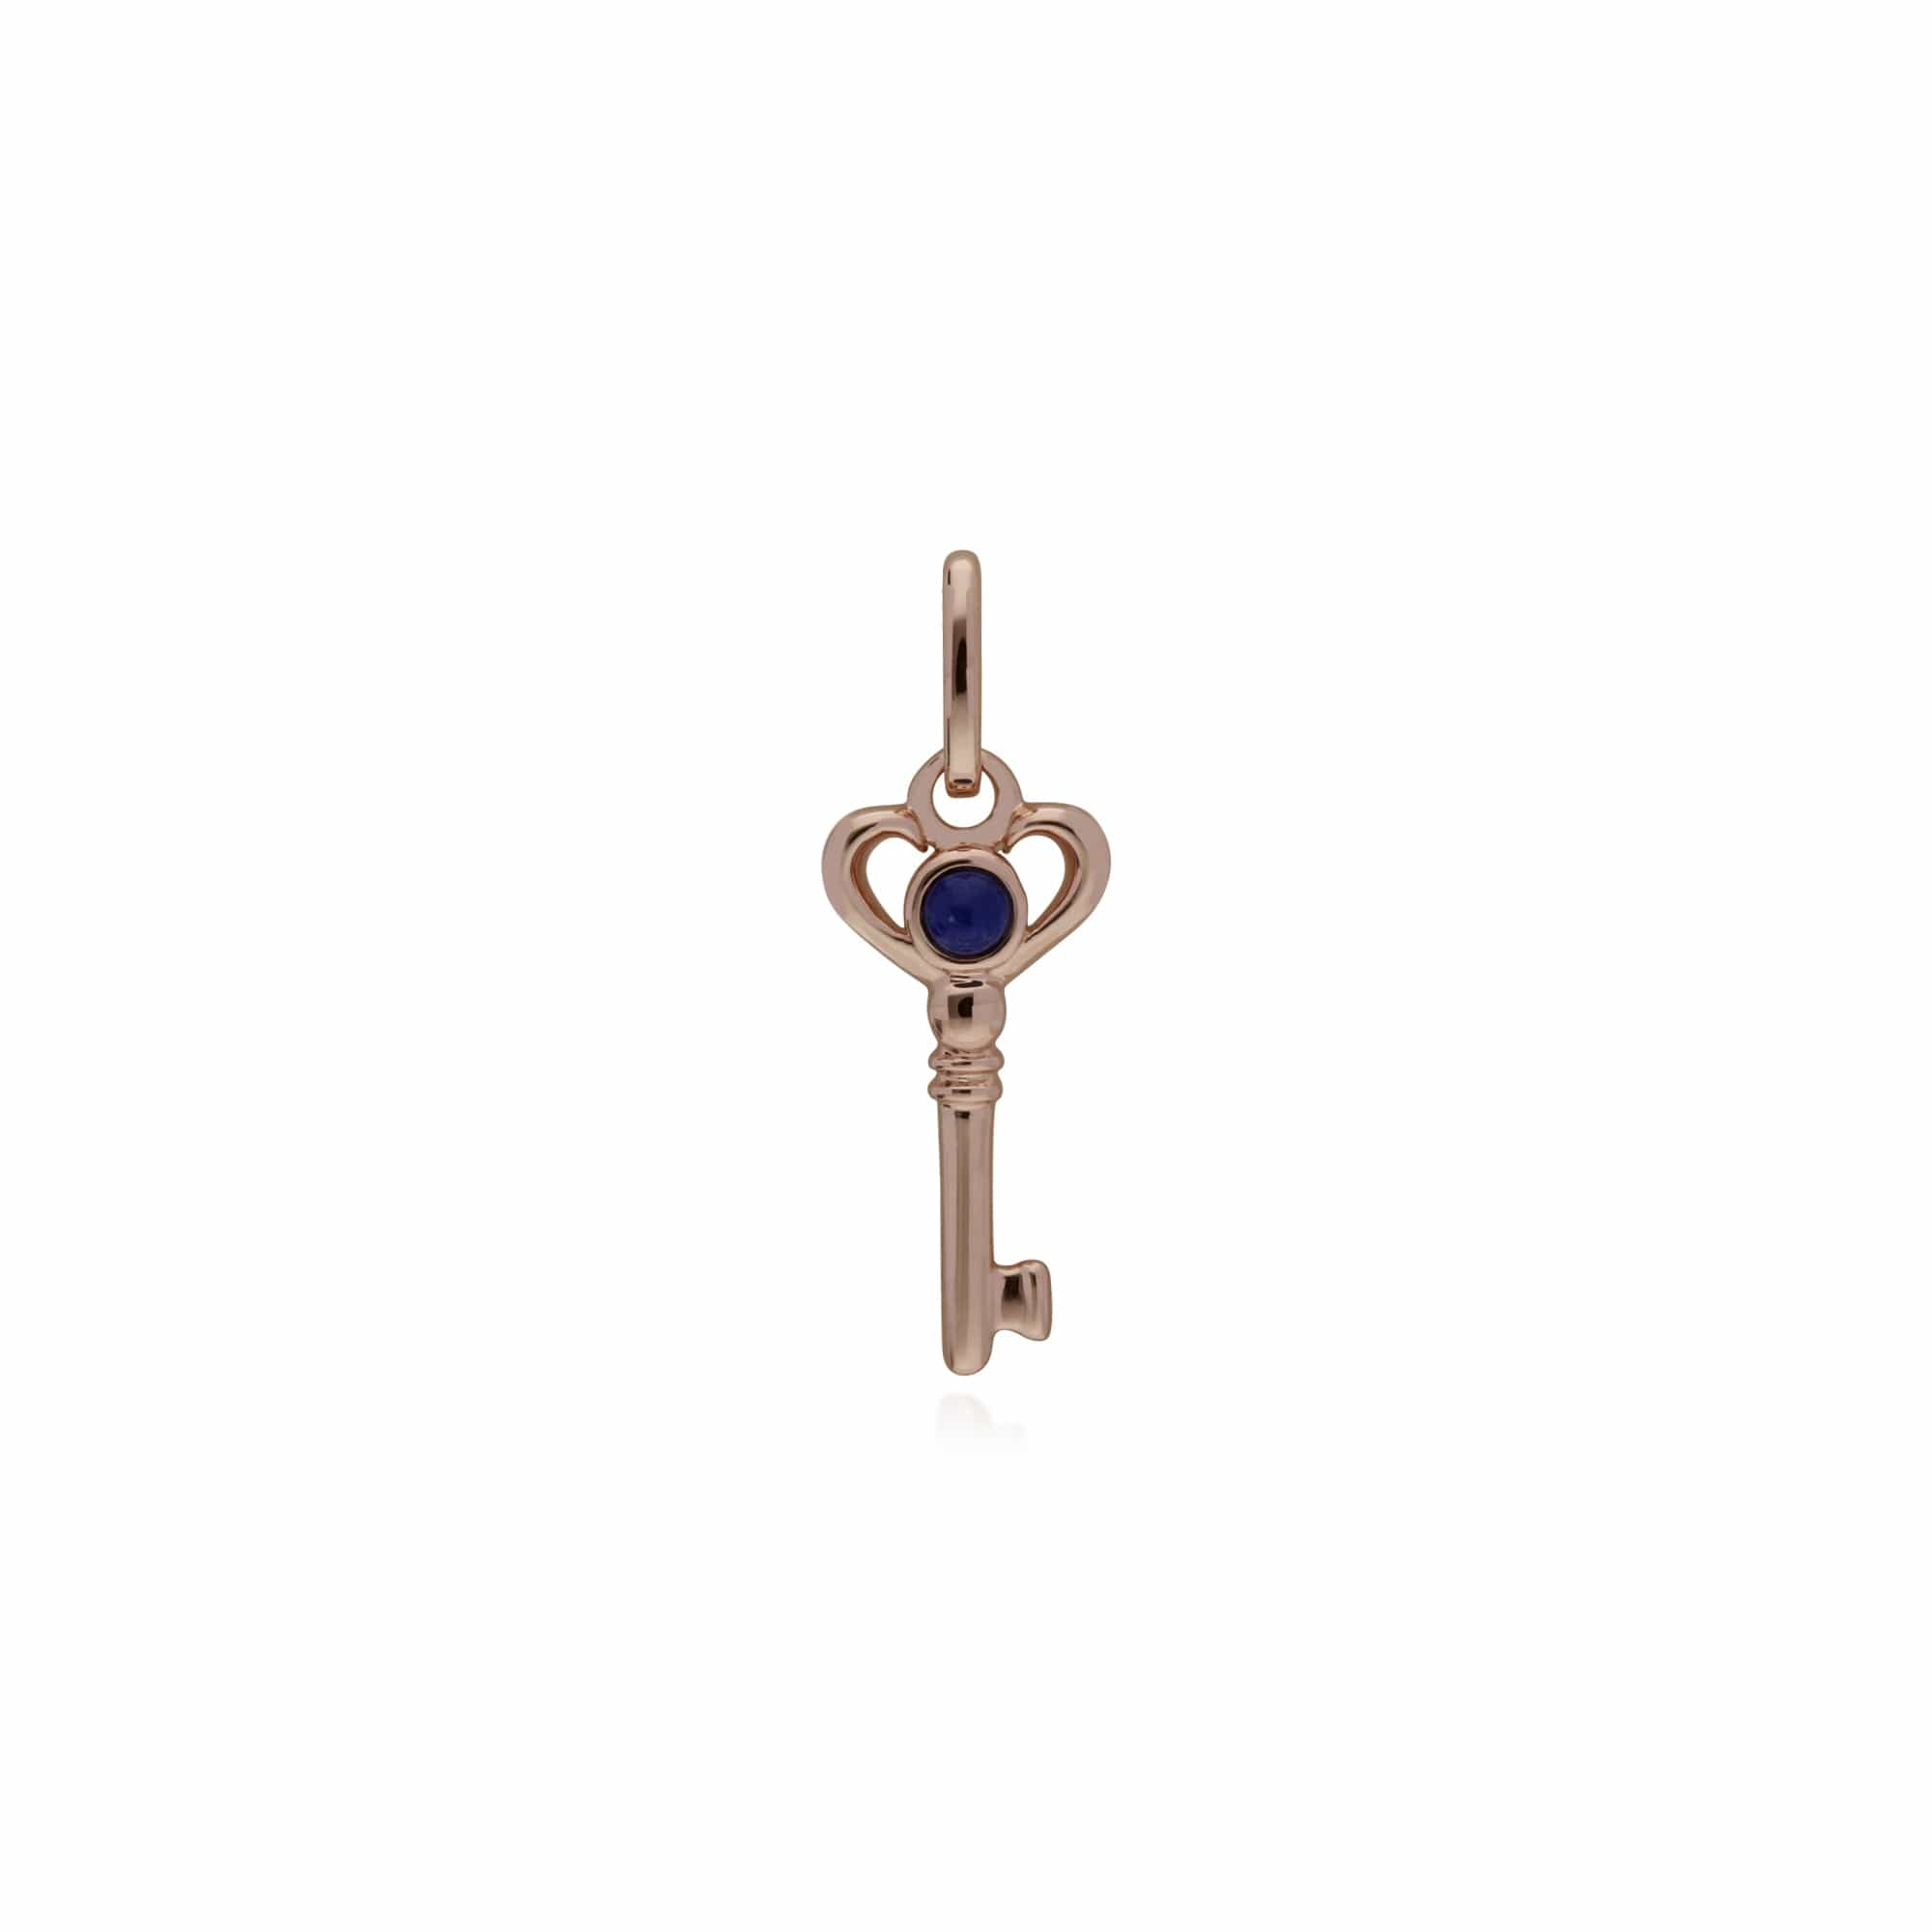 270P027401925-270P026501925 Classic Swirl Heart Lock Pendant & Lapis Lazuli Key Charm in Rose Gold Plated 925 Sterling Silver 2